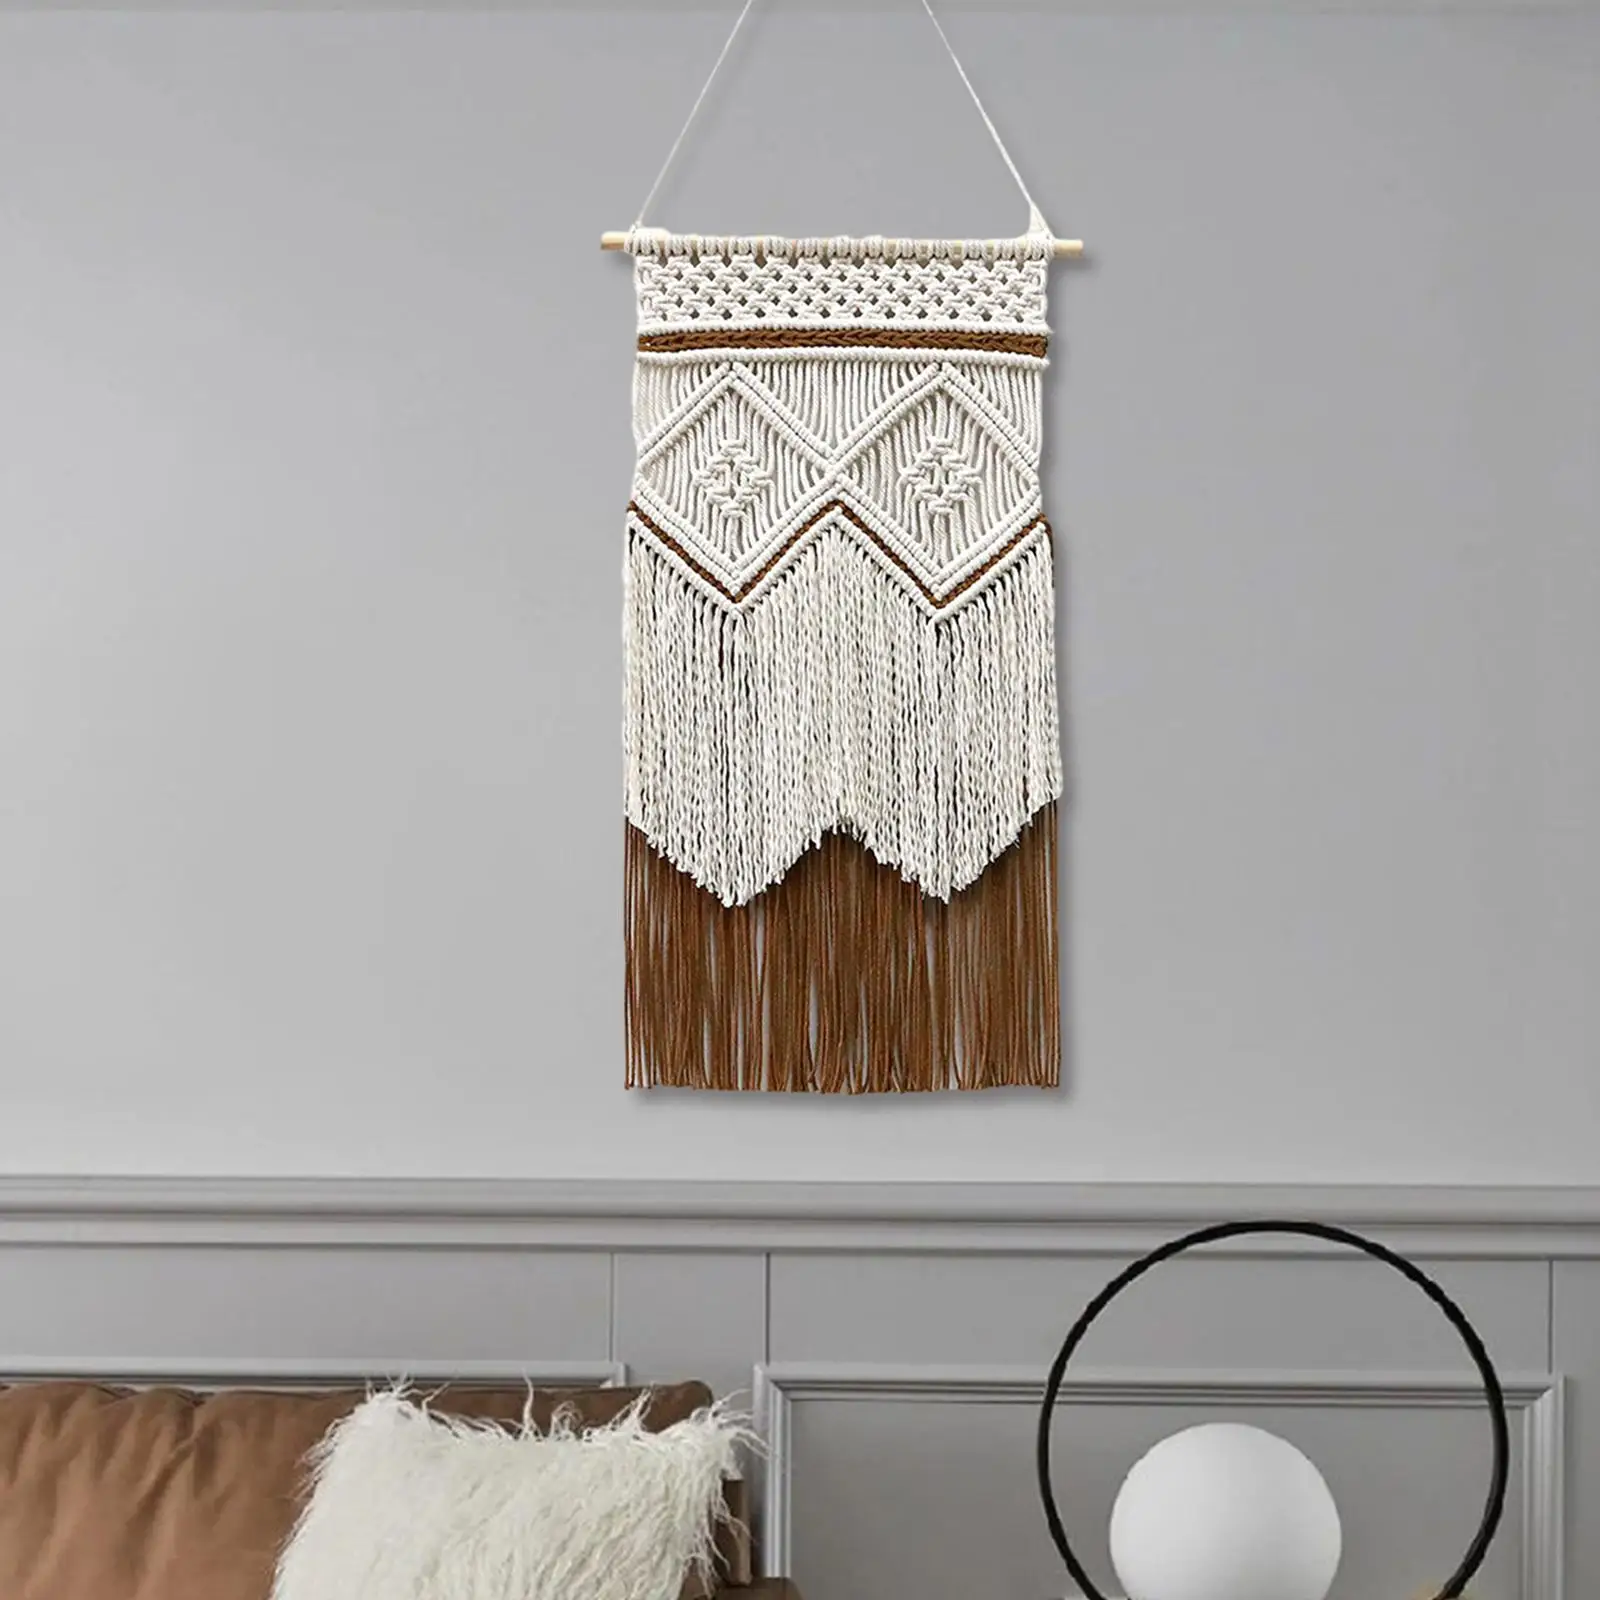 Handmade Woven Tapestry Tassels Wall Decor Woven Tapestry Macrame Wall Hanging for Wedding Apartment Dorm Living Room Bedroom